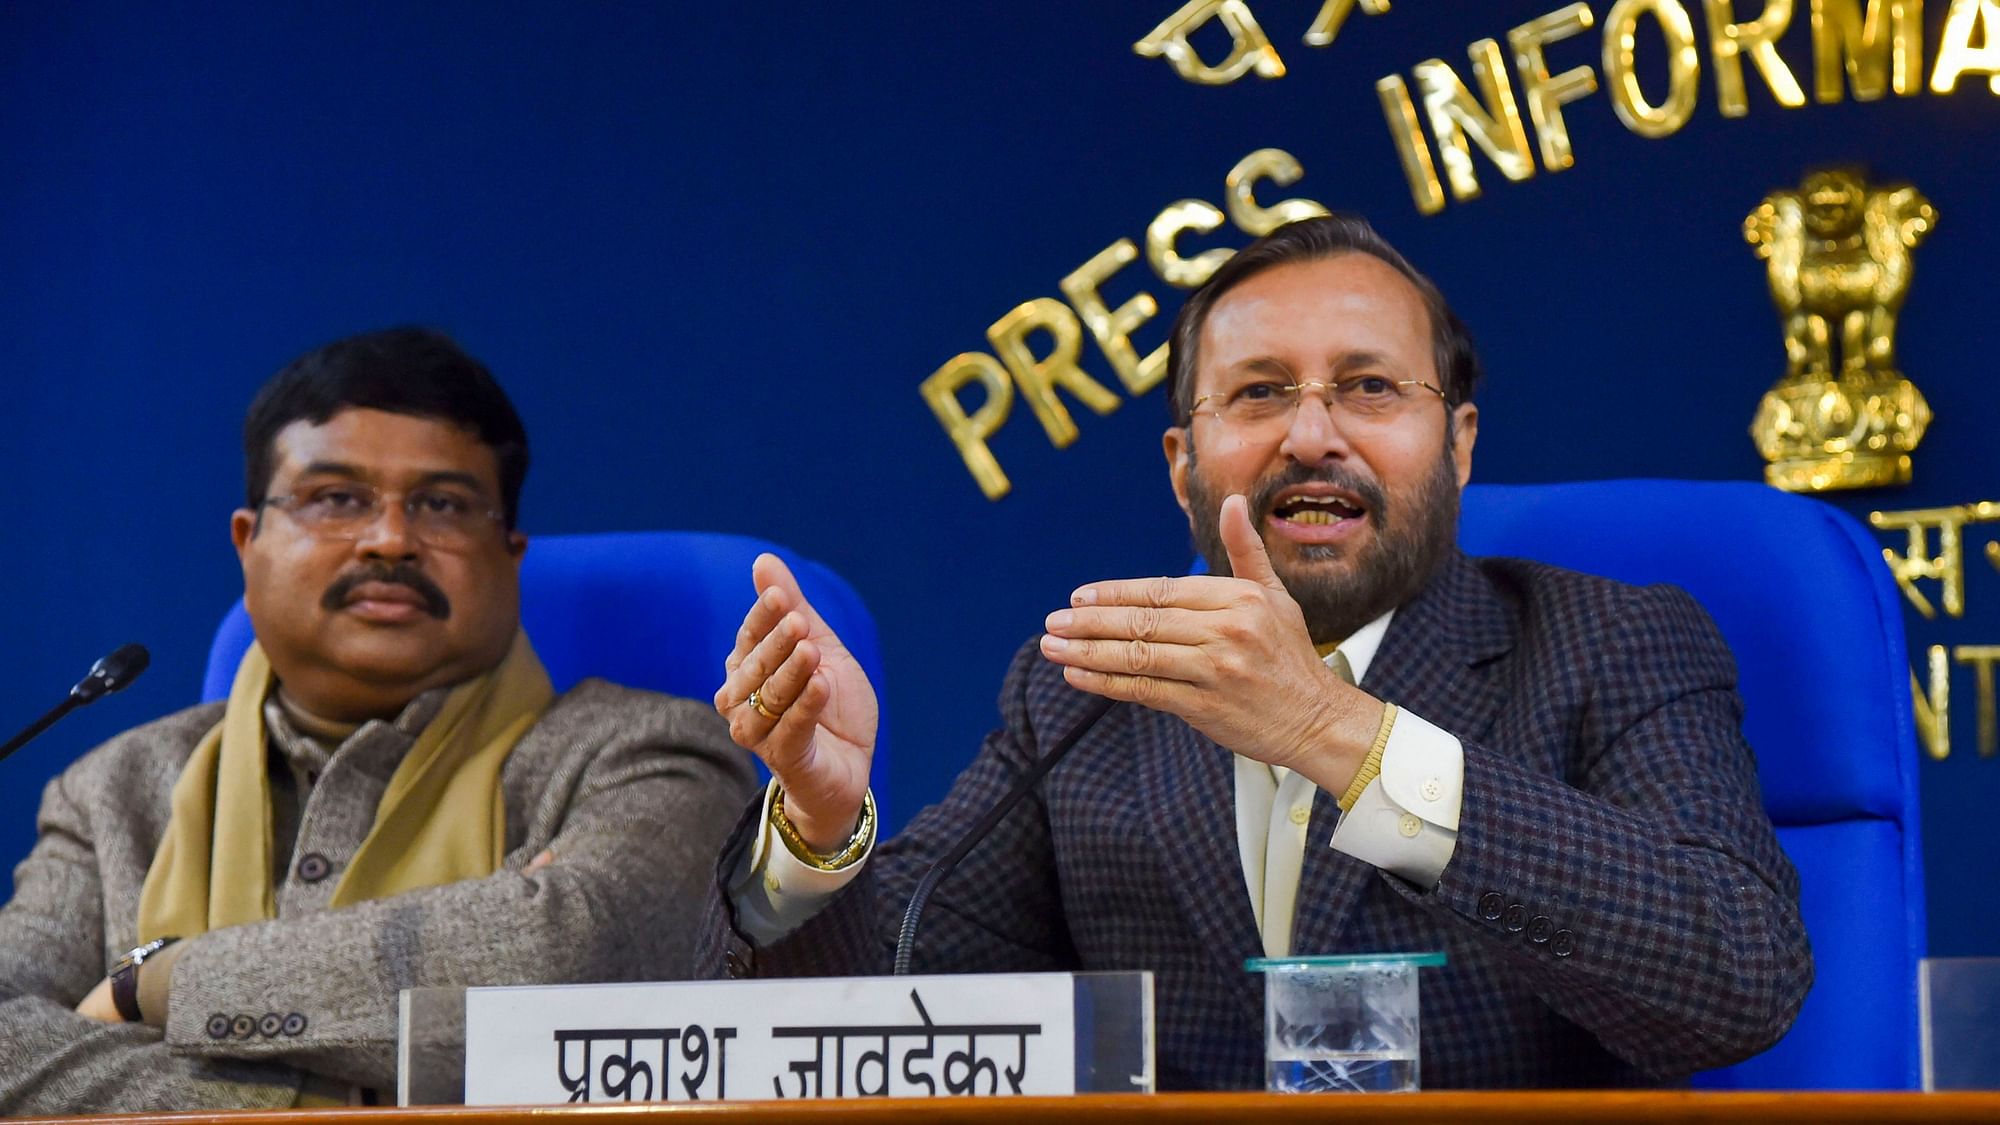 Union minister Prakash Javadekar (right) said questions on date and place of birth of parents “will be considered dropped” if respondent does not provide details.